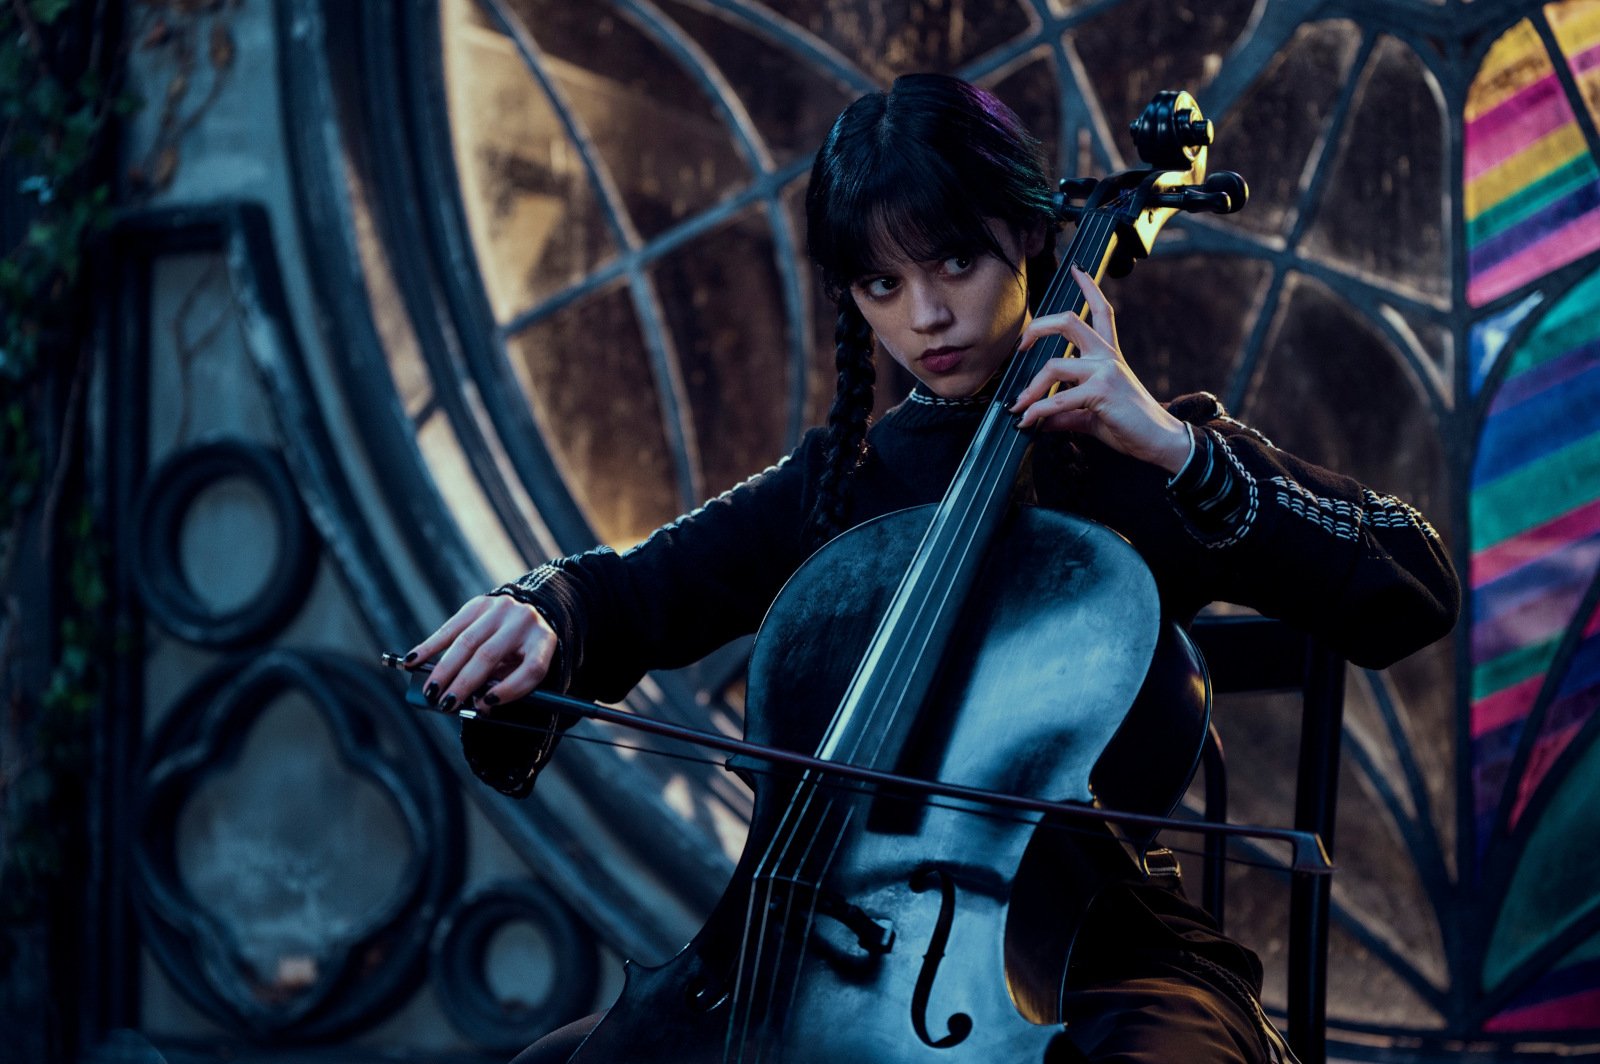 Jenna Ortega as Wednesday Addams in 'Wednesday' for our article about the Netflix show's weekly viewership. She's playing an instrument.